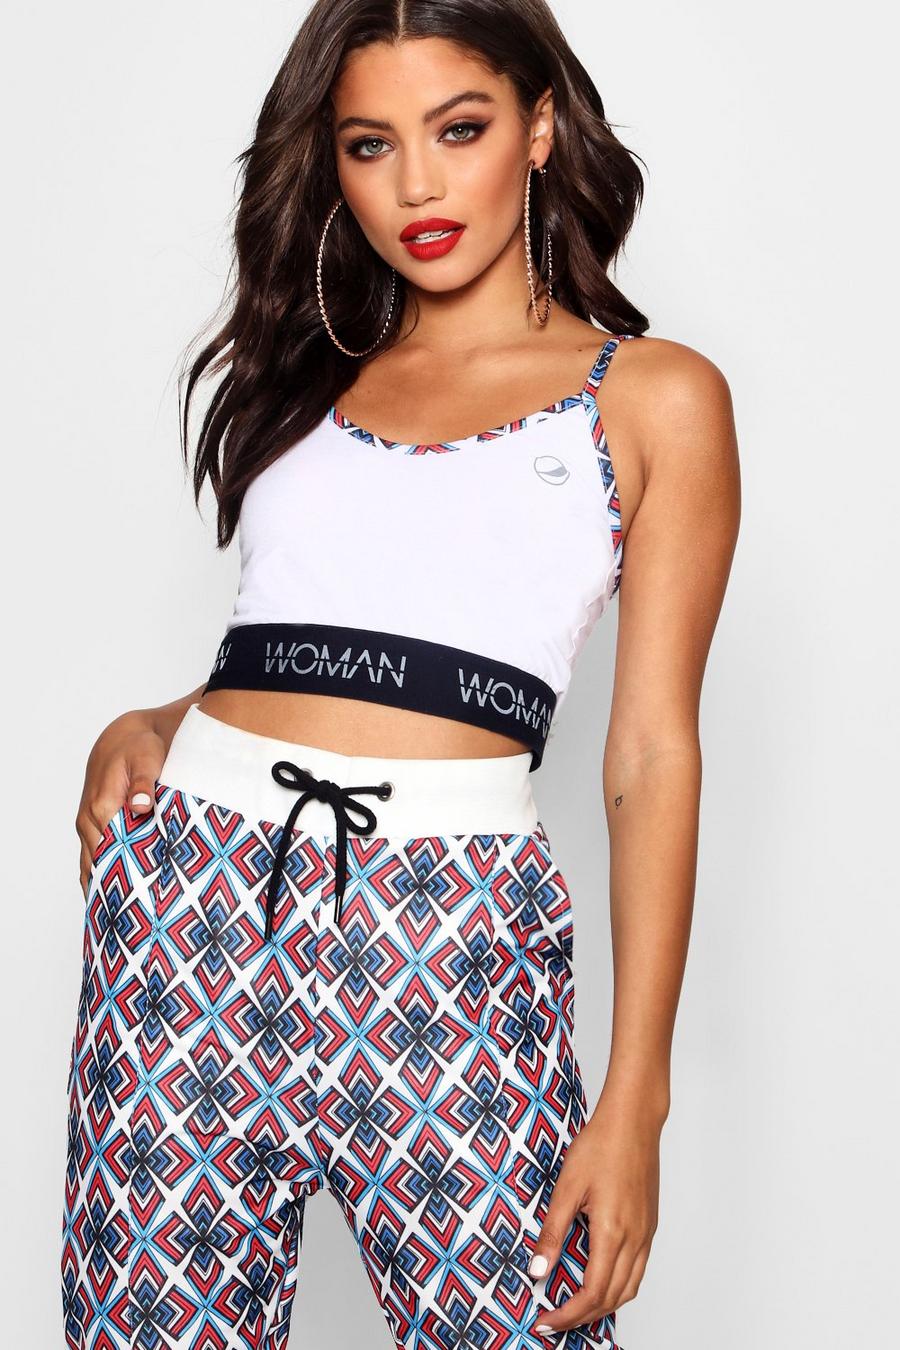 Pepsi X boohoo Strappy Patterned Crop Top image number 1